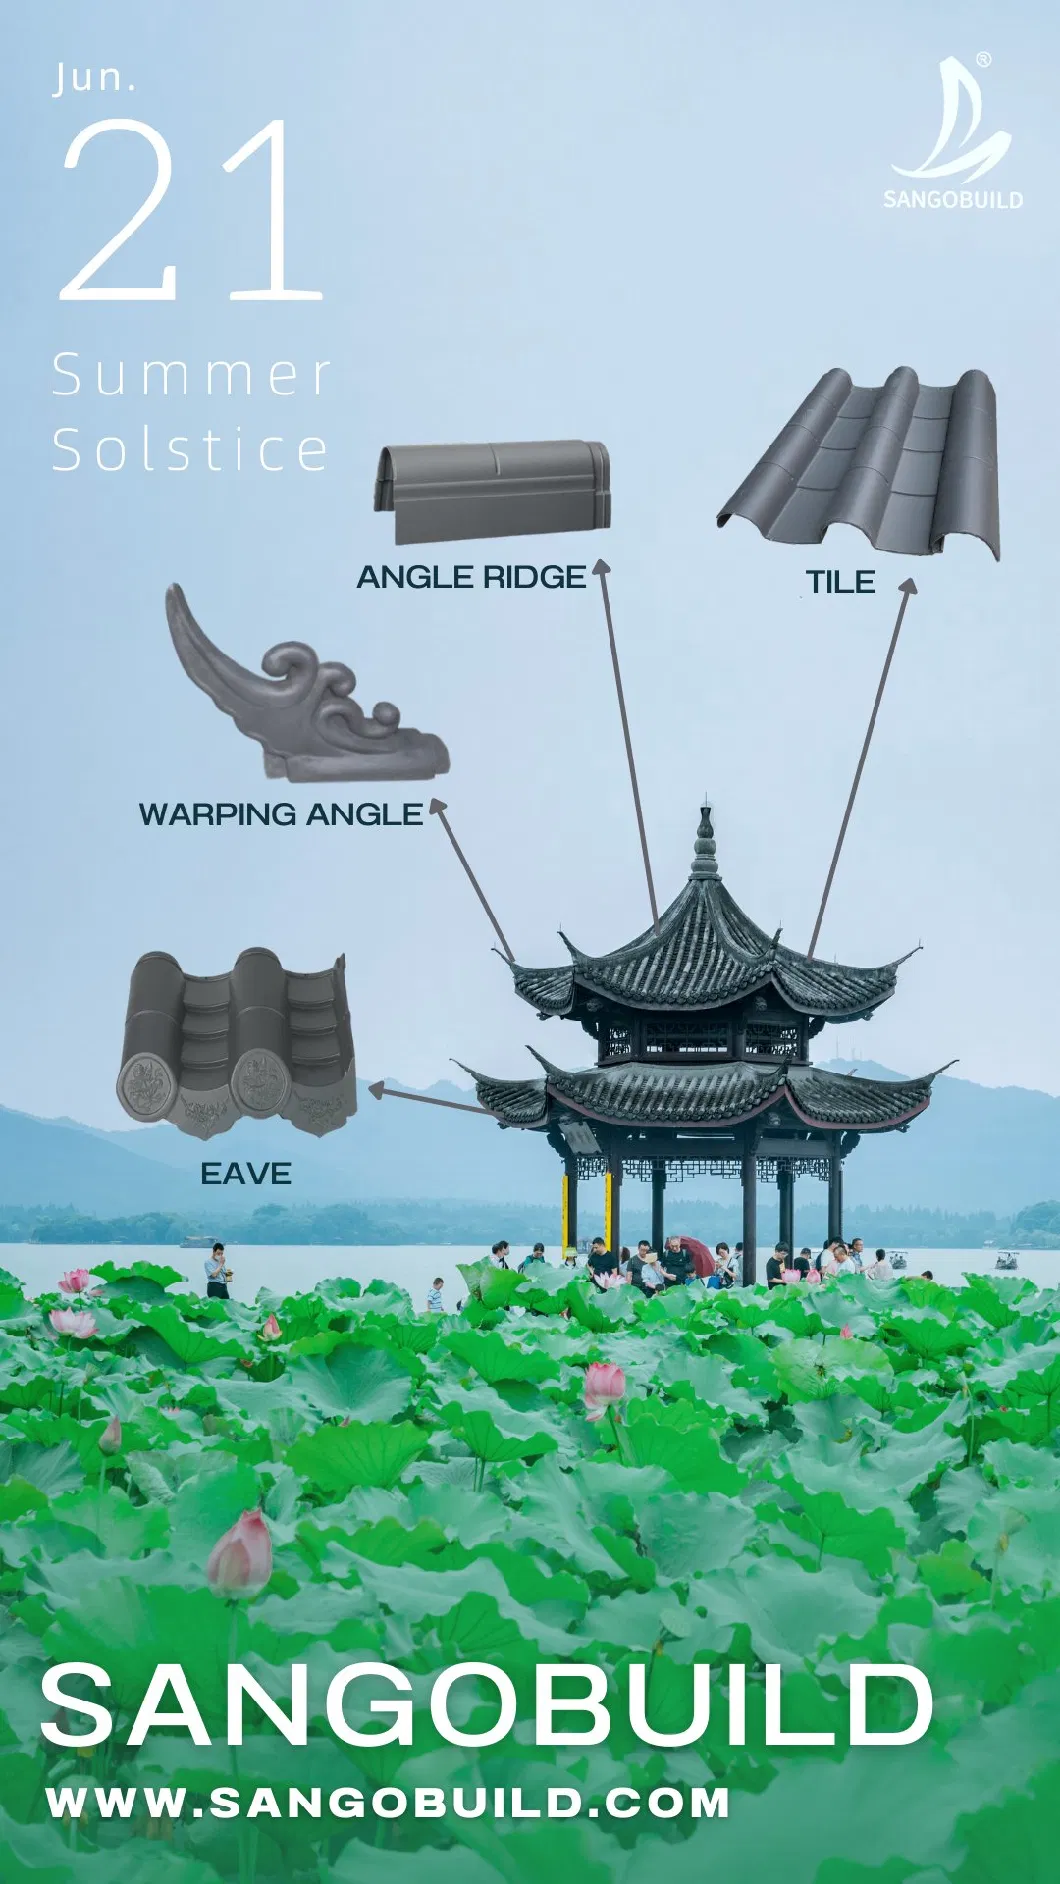 Roof Tiles China Polymeric Roof Temple China Roofing Tiles for Chemical Acid Storage Boildings